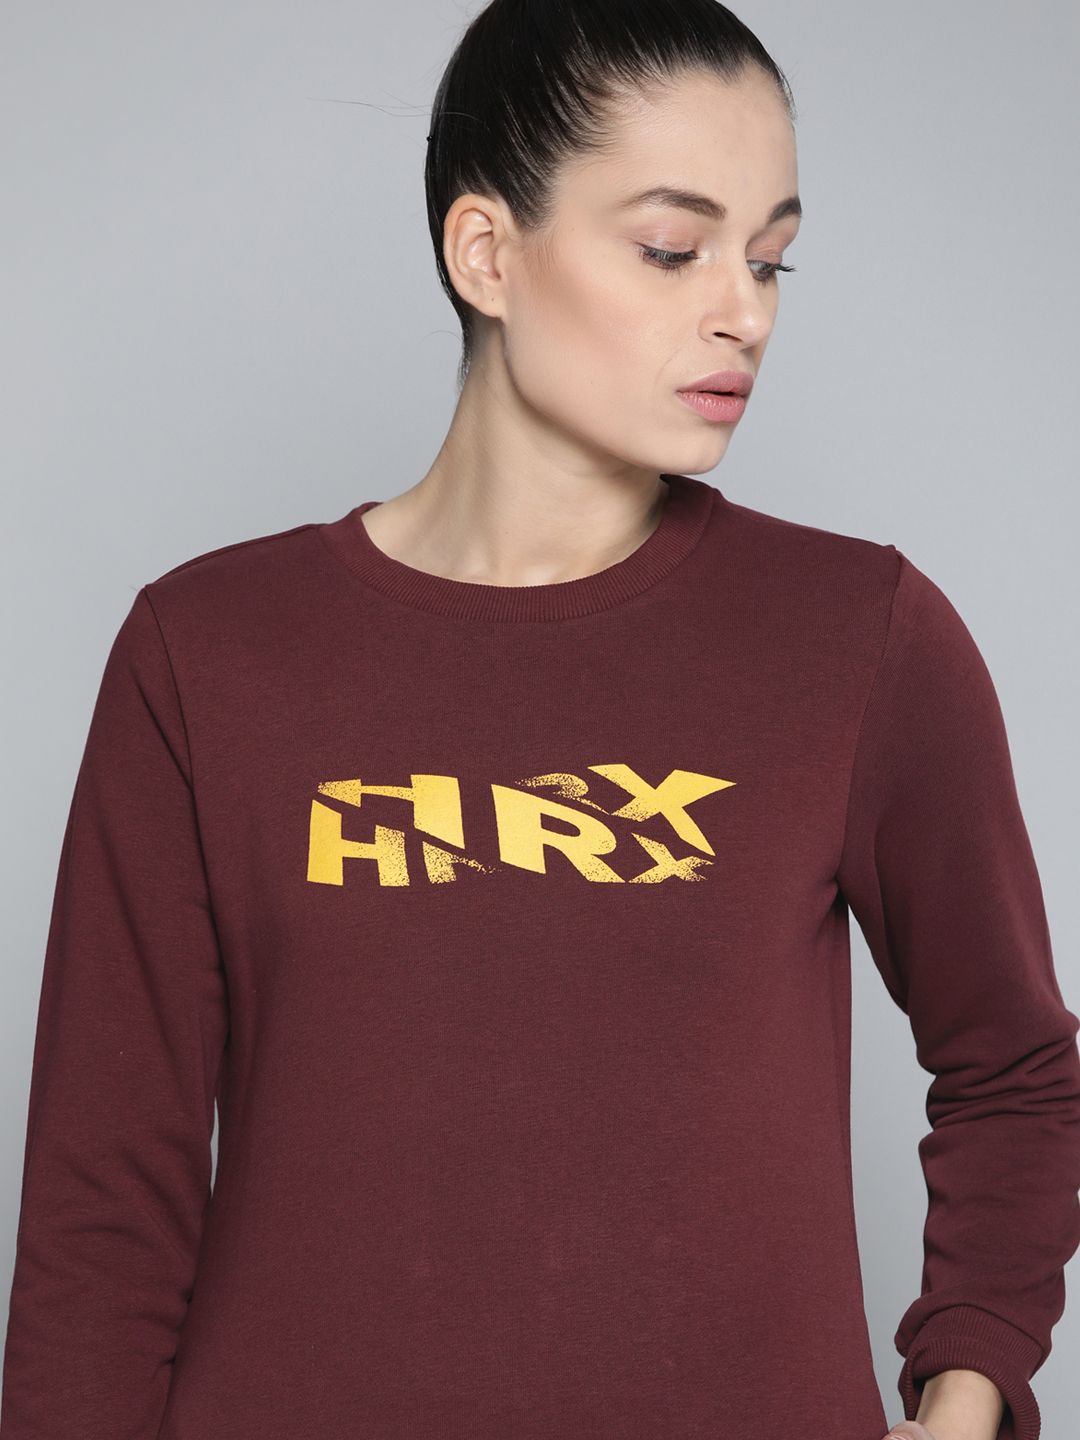 HRX By Hrithik Roshan Lifestyle Women Port Royale Rapid-Dry Brand Carrier Sweatshirt Price in India